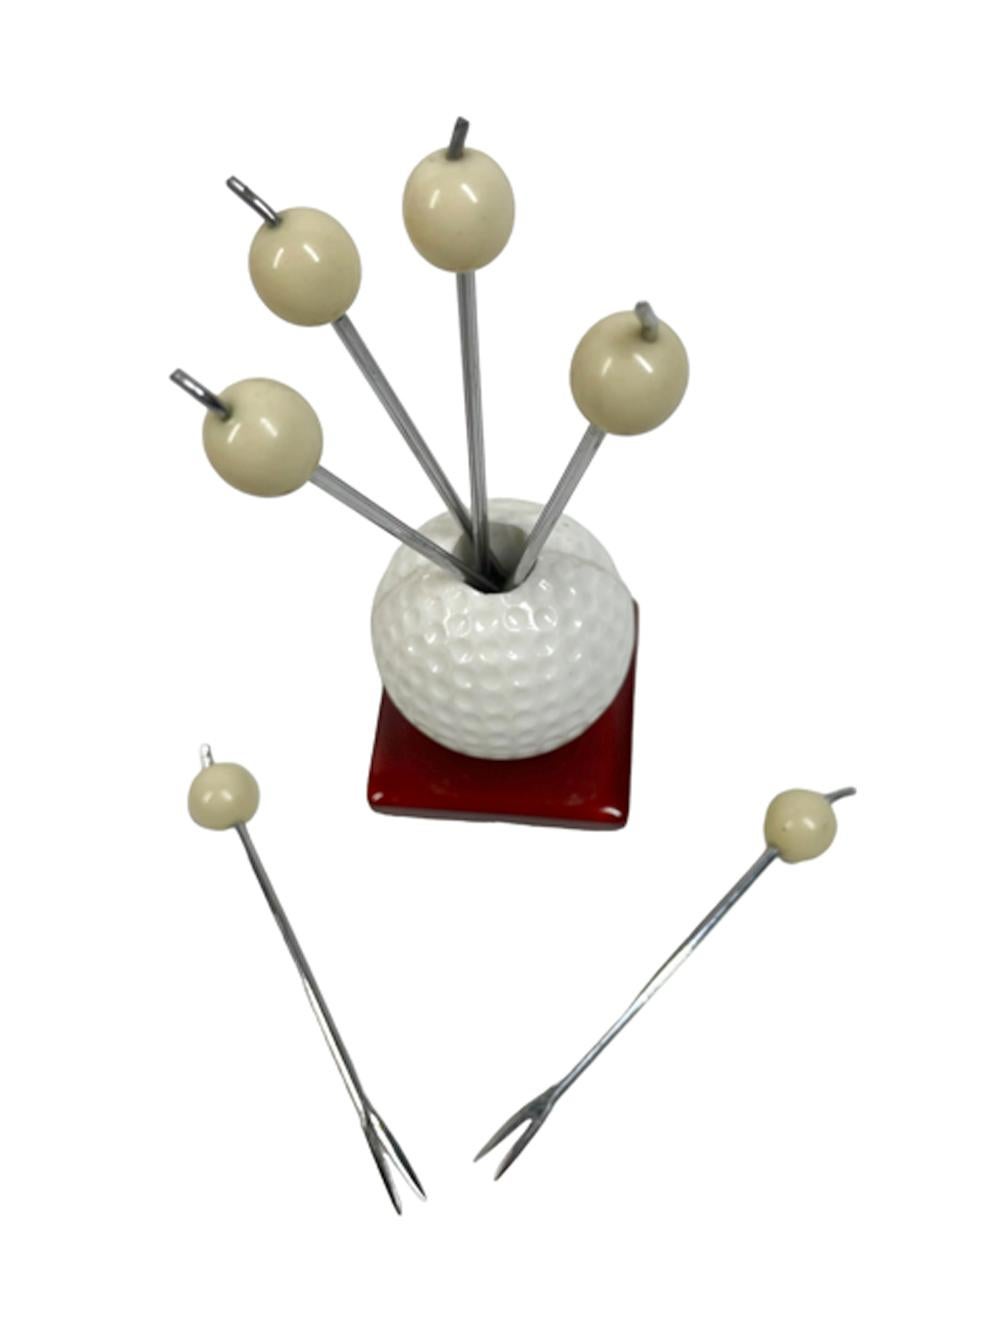 Set of six white ball topped forked chrome cocktail picks in a white plastic golf ball holder with a square translucent apple juice colored Bakelite base. 